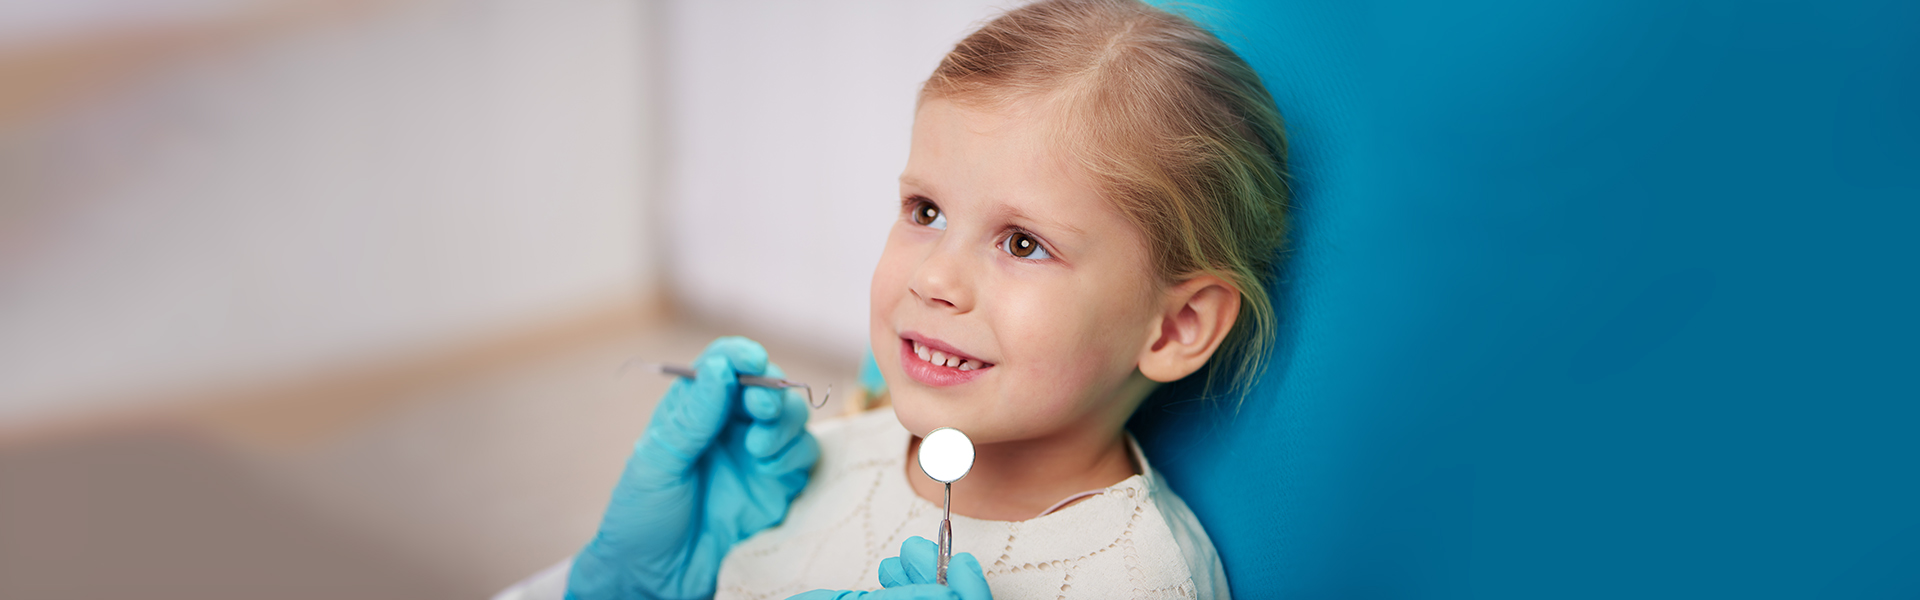 Childhood Dentist Visits: Why Start Early